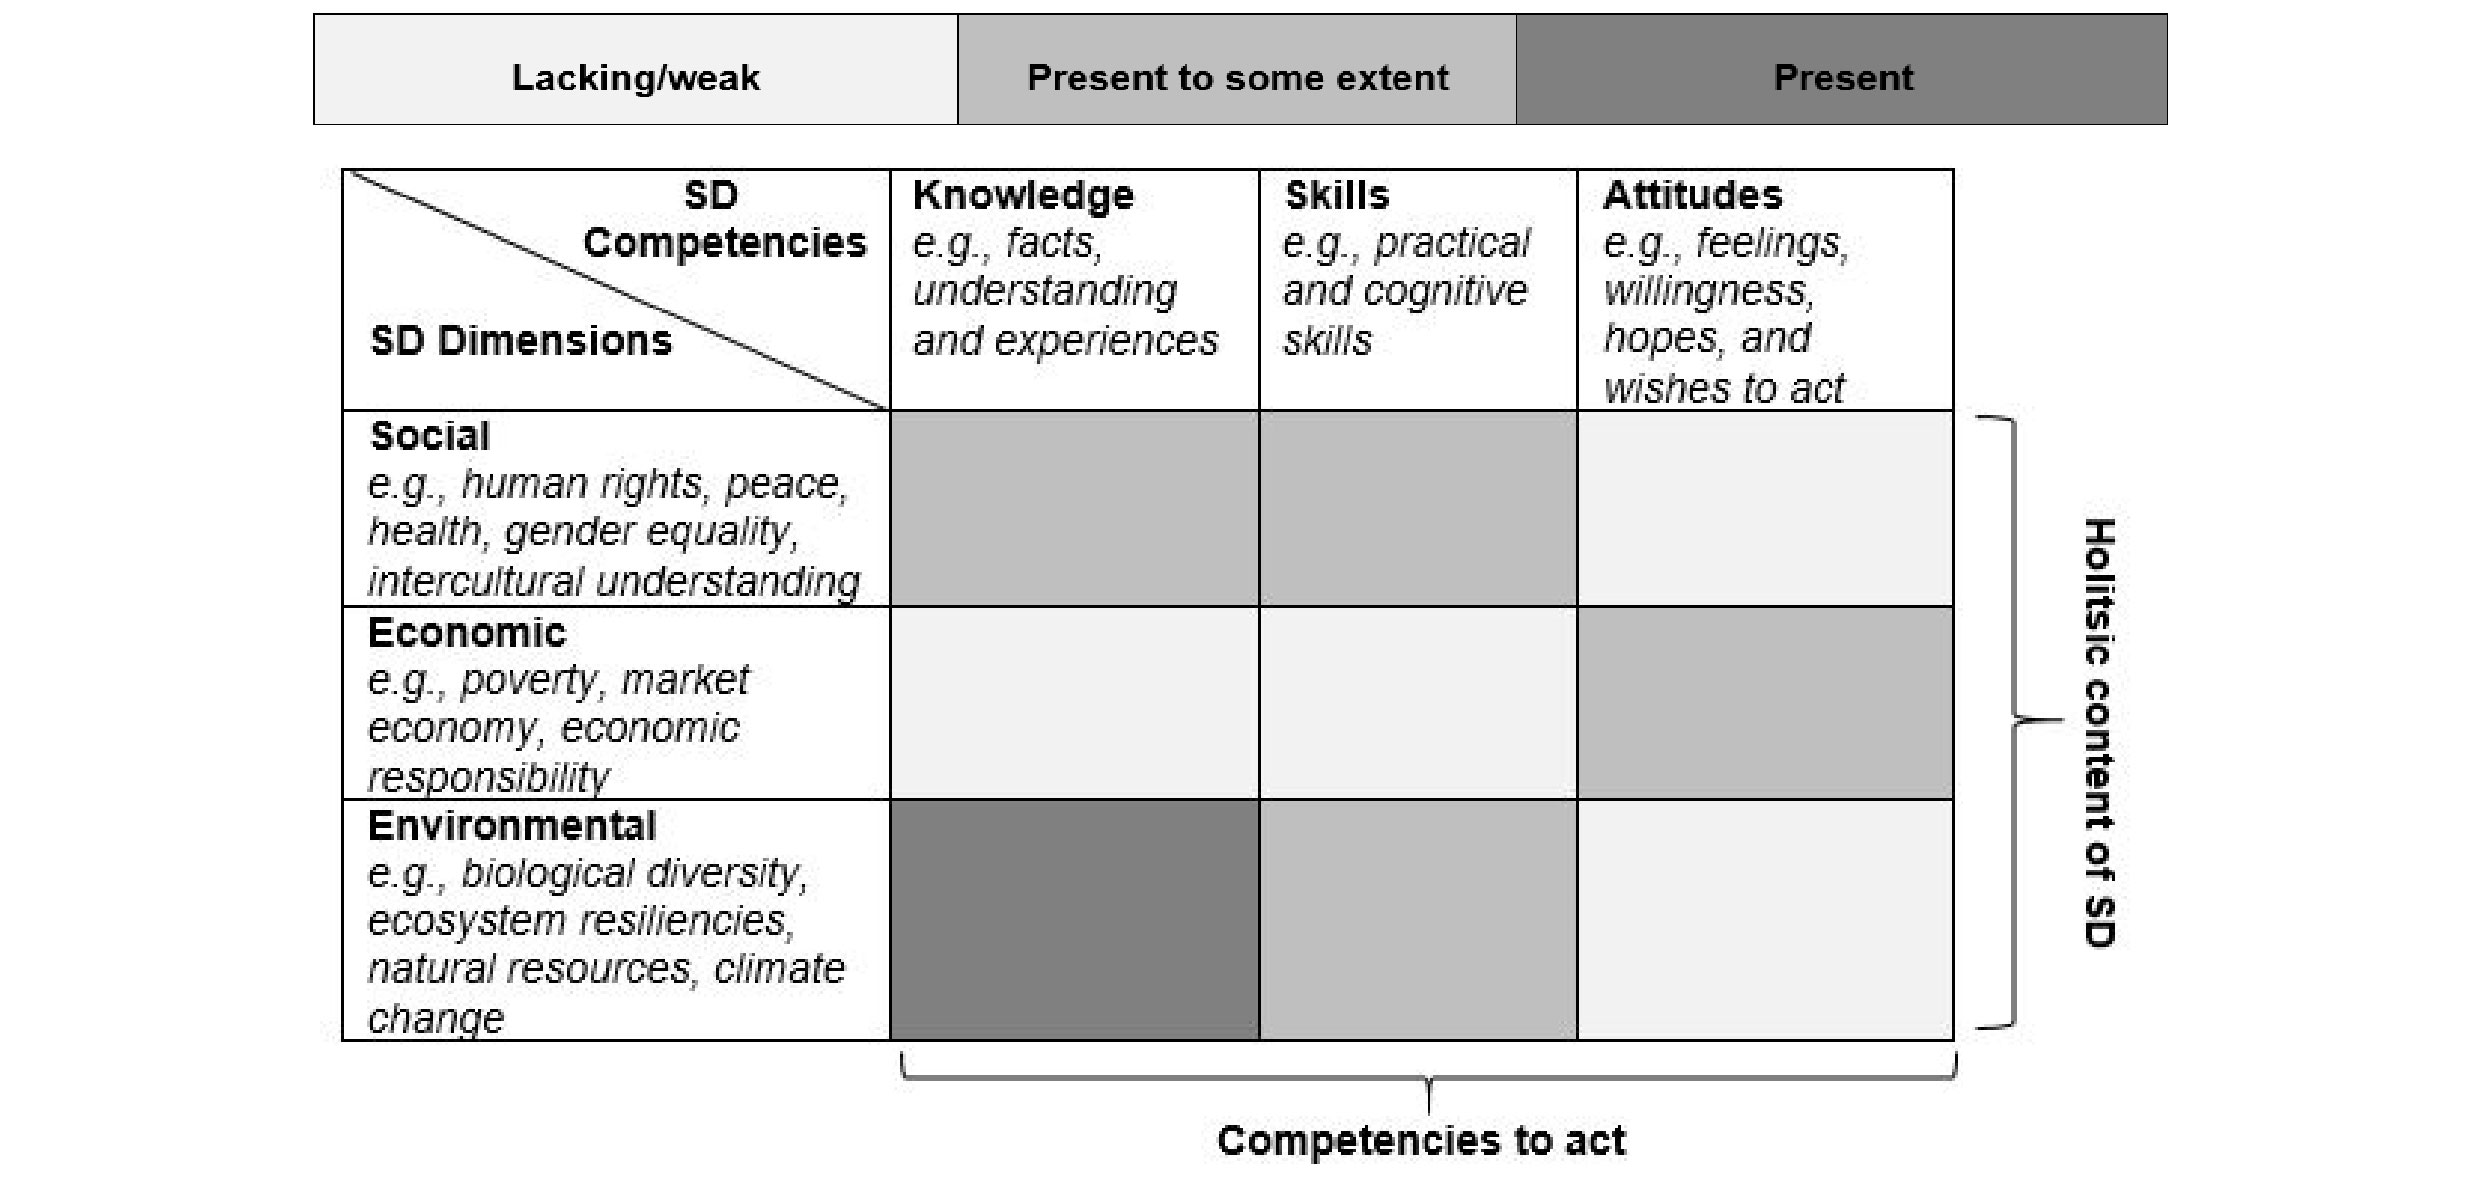 Figure 6. Summary of the results on students’ sustainability consciousness. Light grey indicates lacking or weak, medium grey indicates present to some extent, and dark grey indicates present.